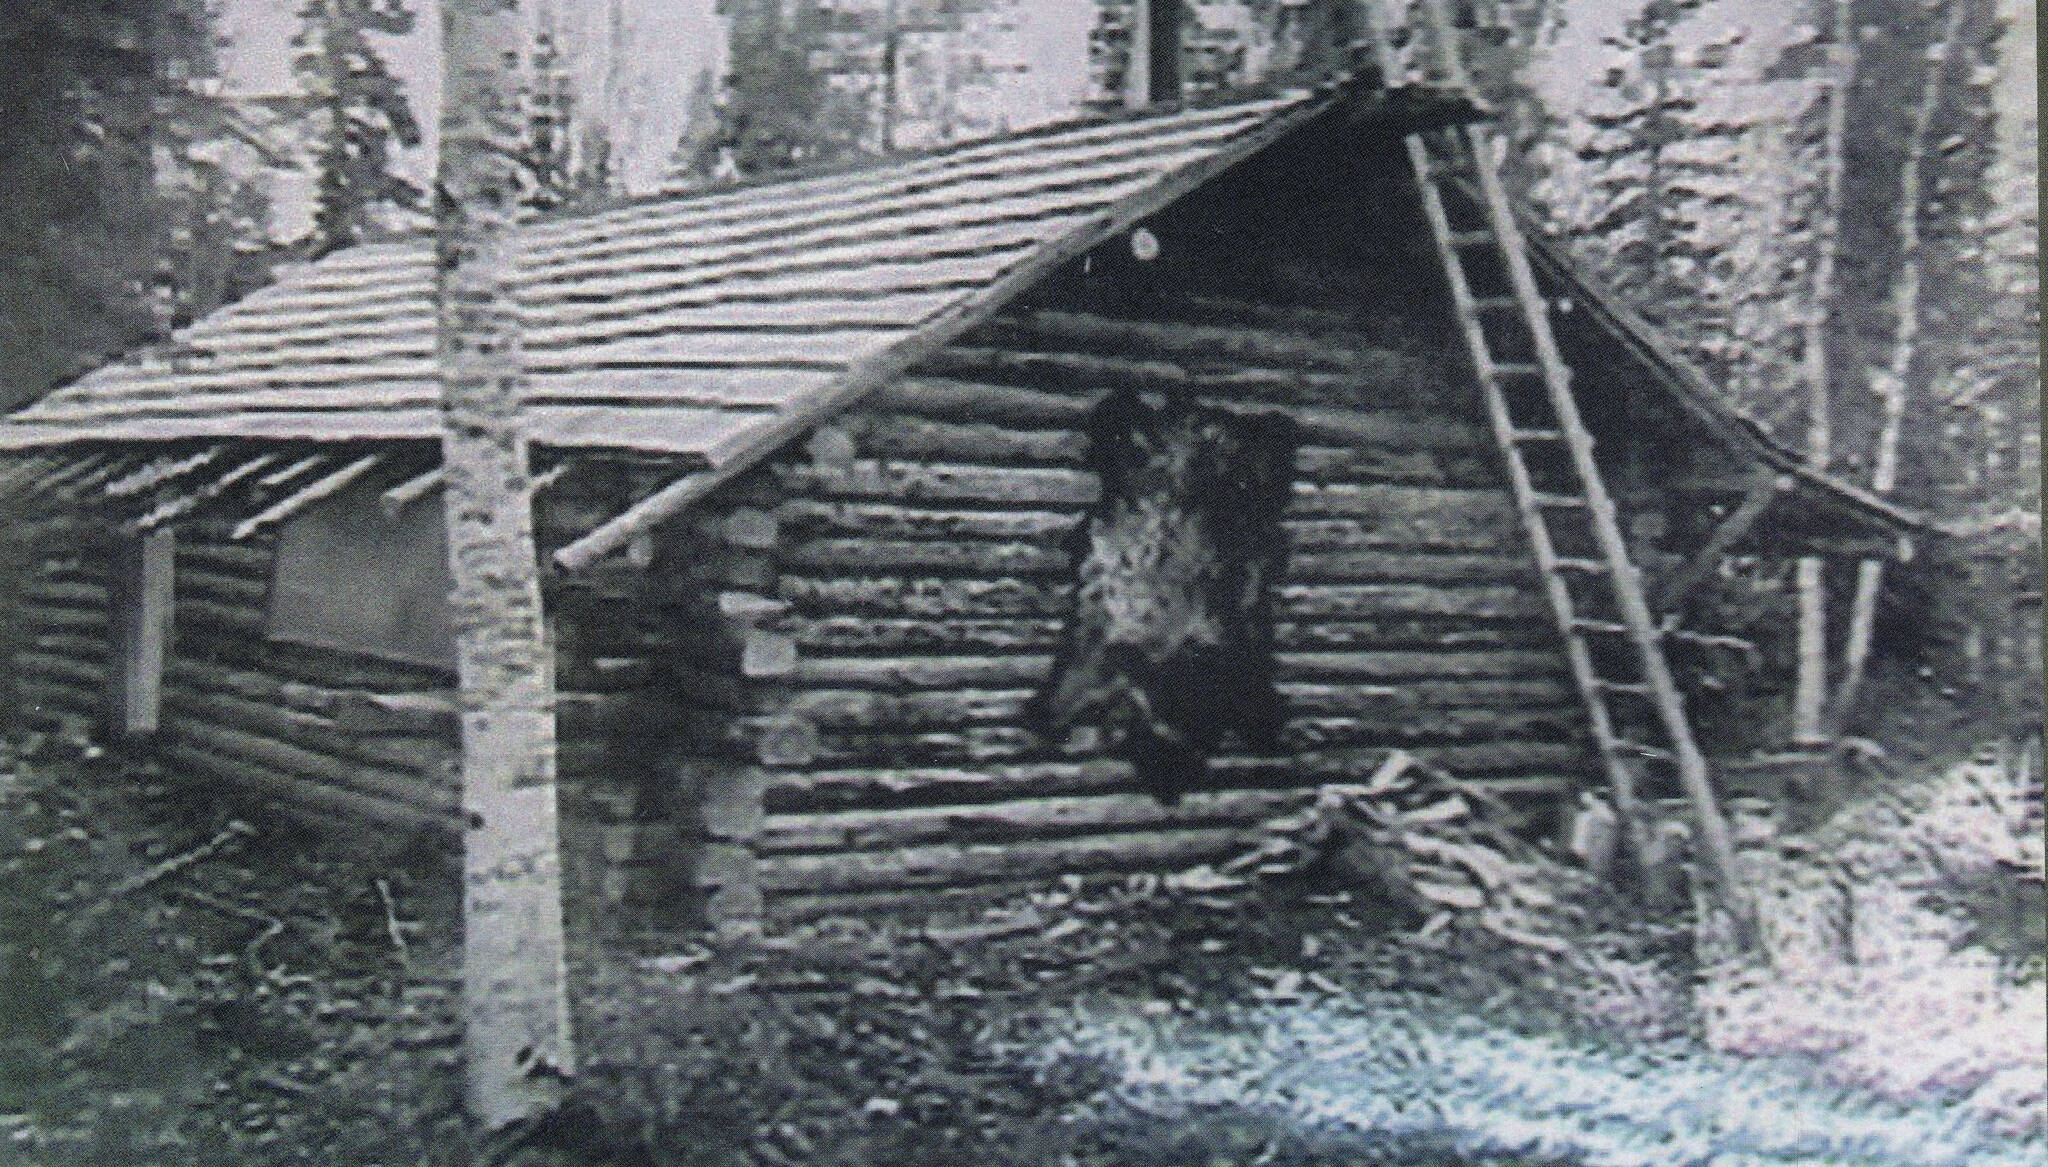 Photo courtesy of the Lancashire Family Collection
This is the original Lancashire homestead cabin, completed in the fall of 1948. Before this, the family lived in a large wall tent on their property.